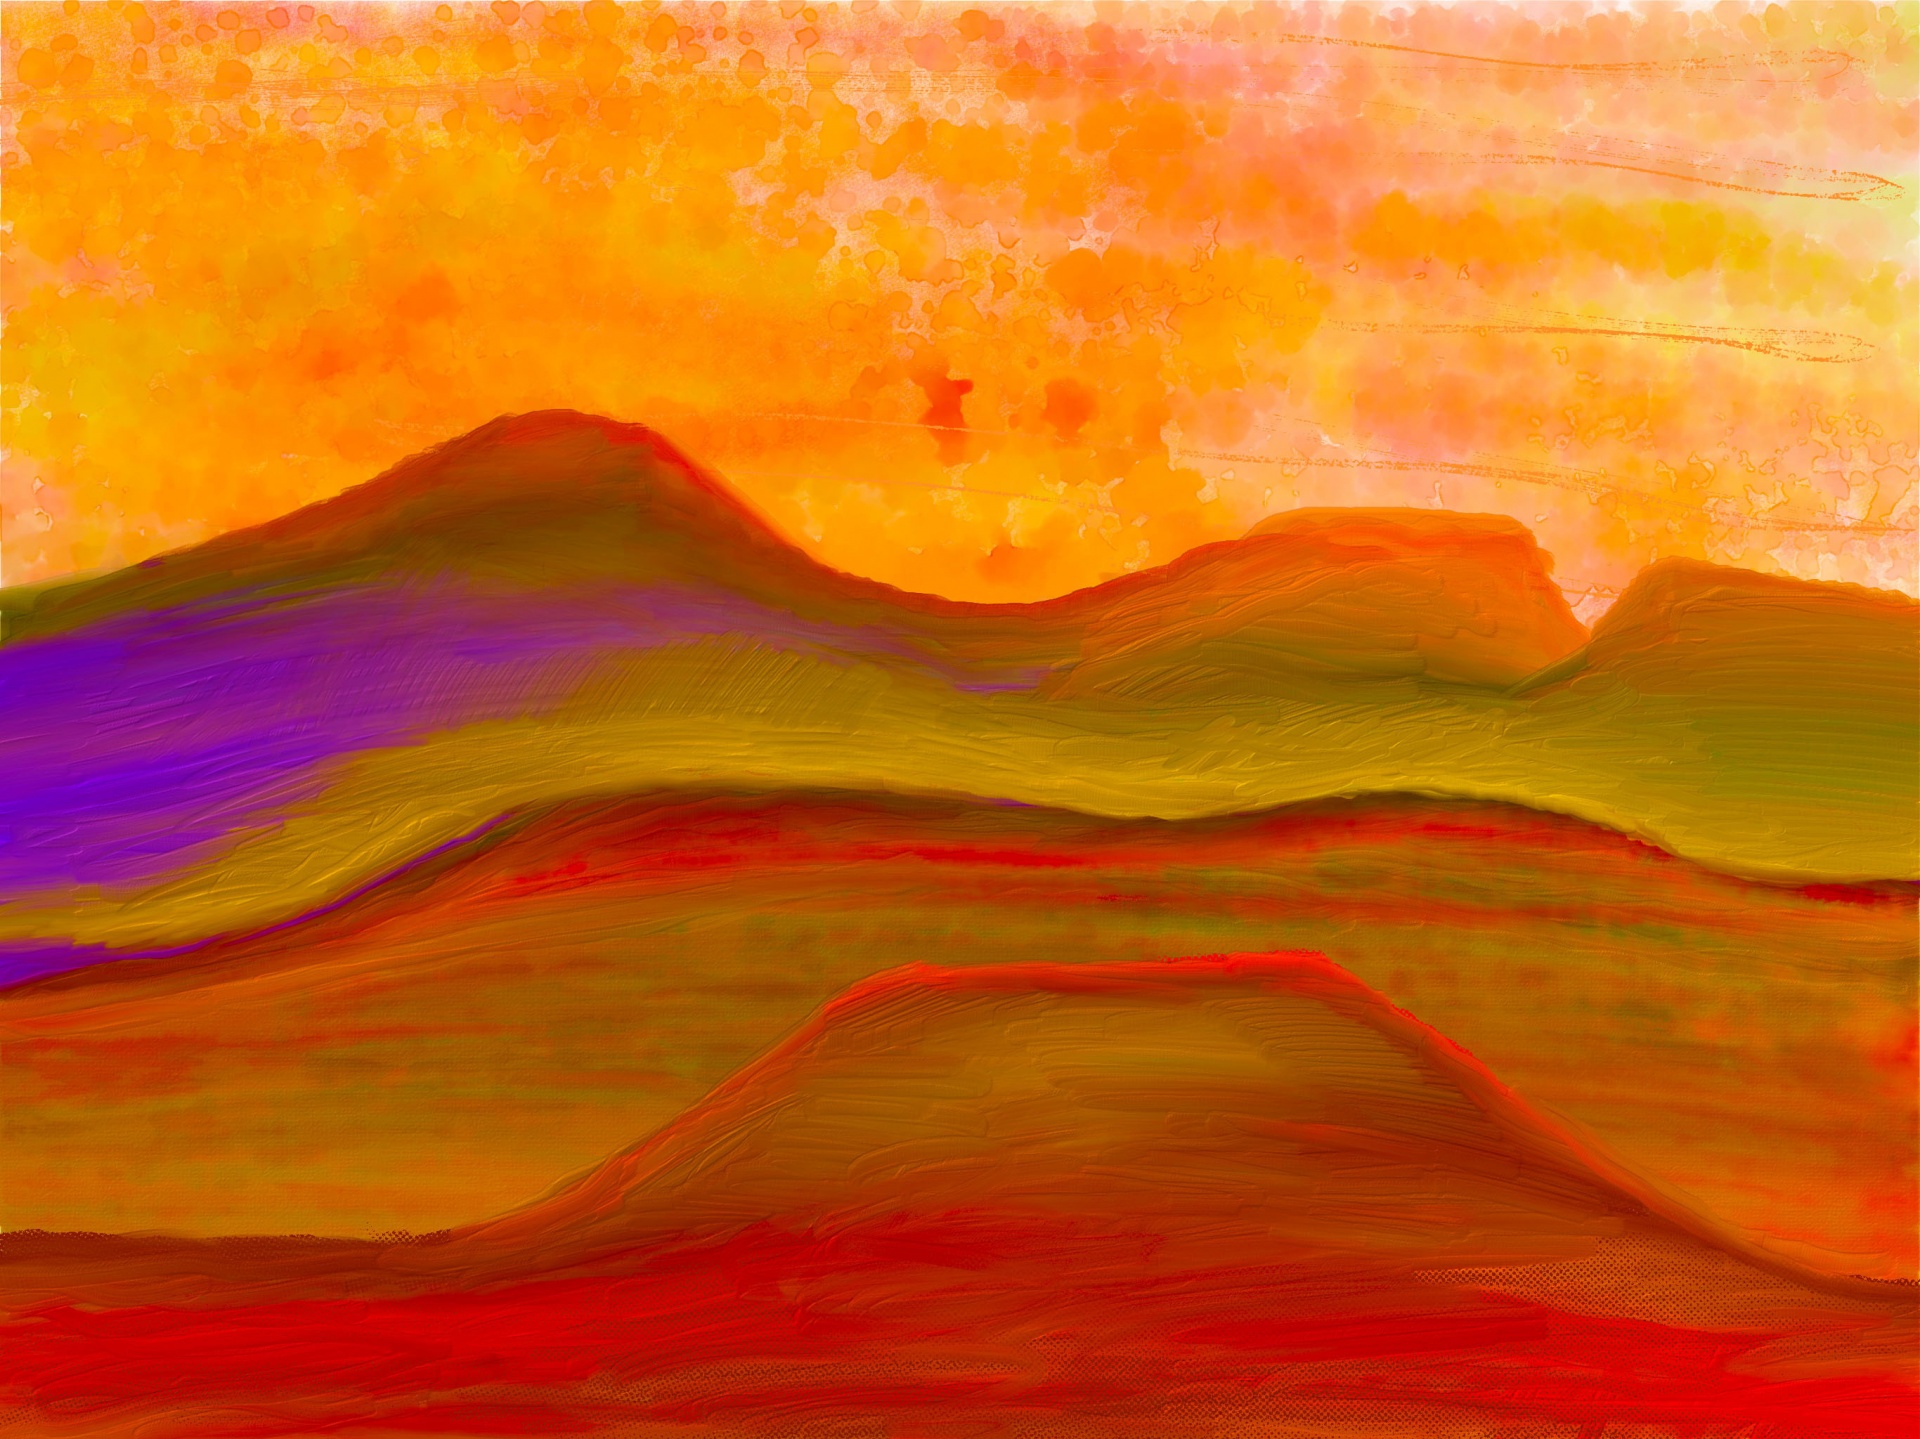 Digital Art of a great hill that I imaged.